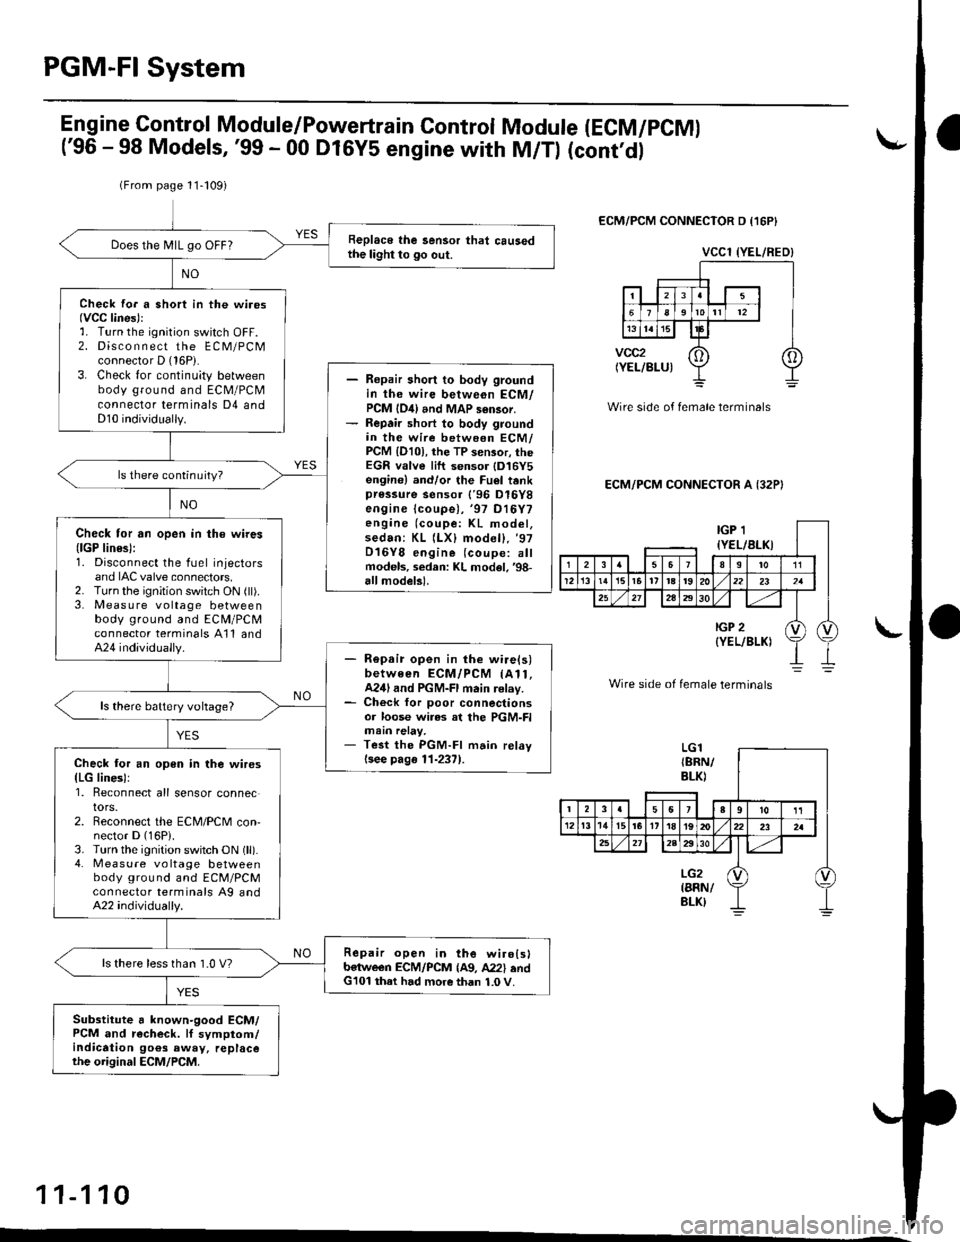 HONDA CIVIC 1998 6.G Workshop Manual PGM-FI System
(From page 11-109)
Replace the sensor that causedthe light to go out.Does the N4lL go OFF?
Check fo. a short in the wi.os(VCC lines)::. Turn the ignition switch OFF.2. Disco n n ect the